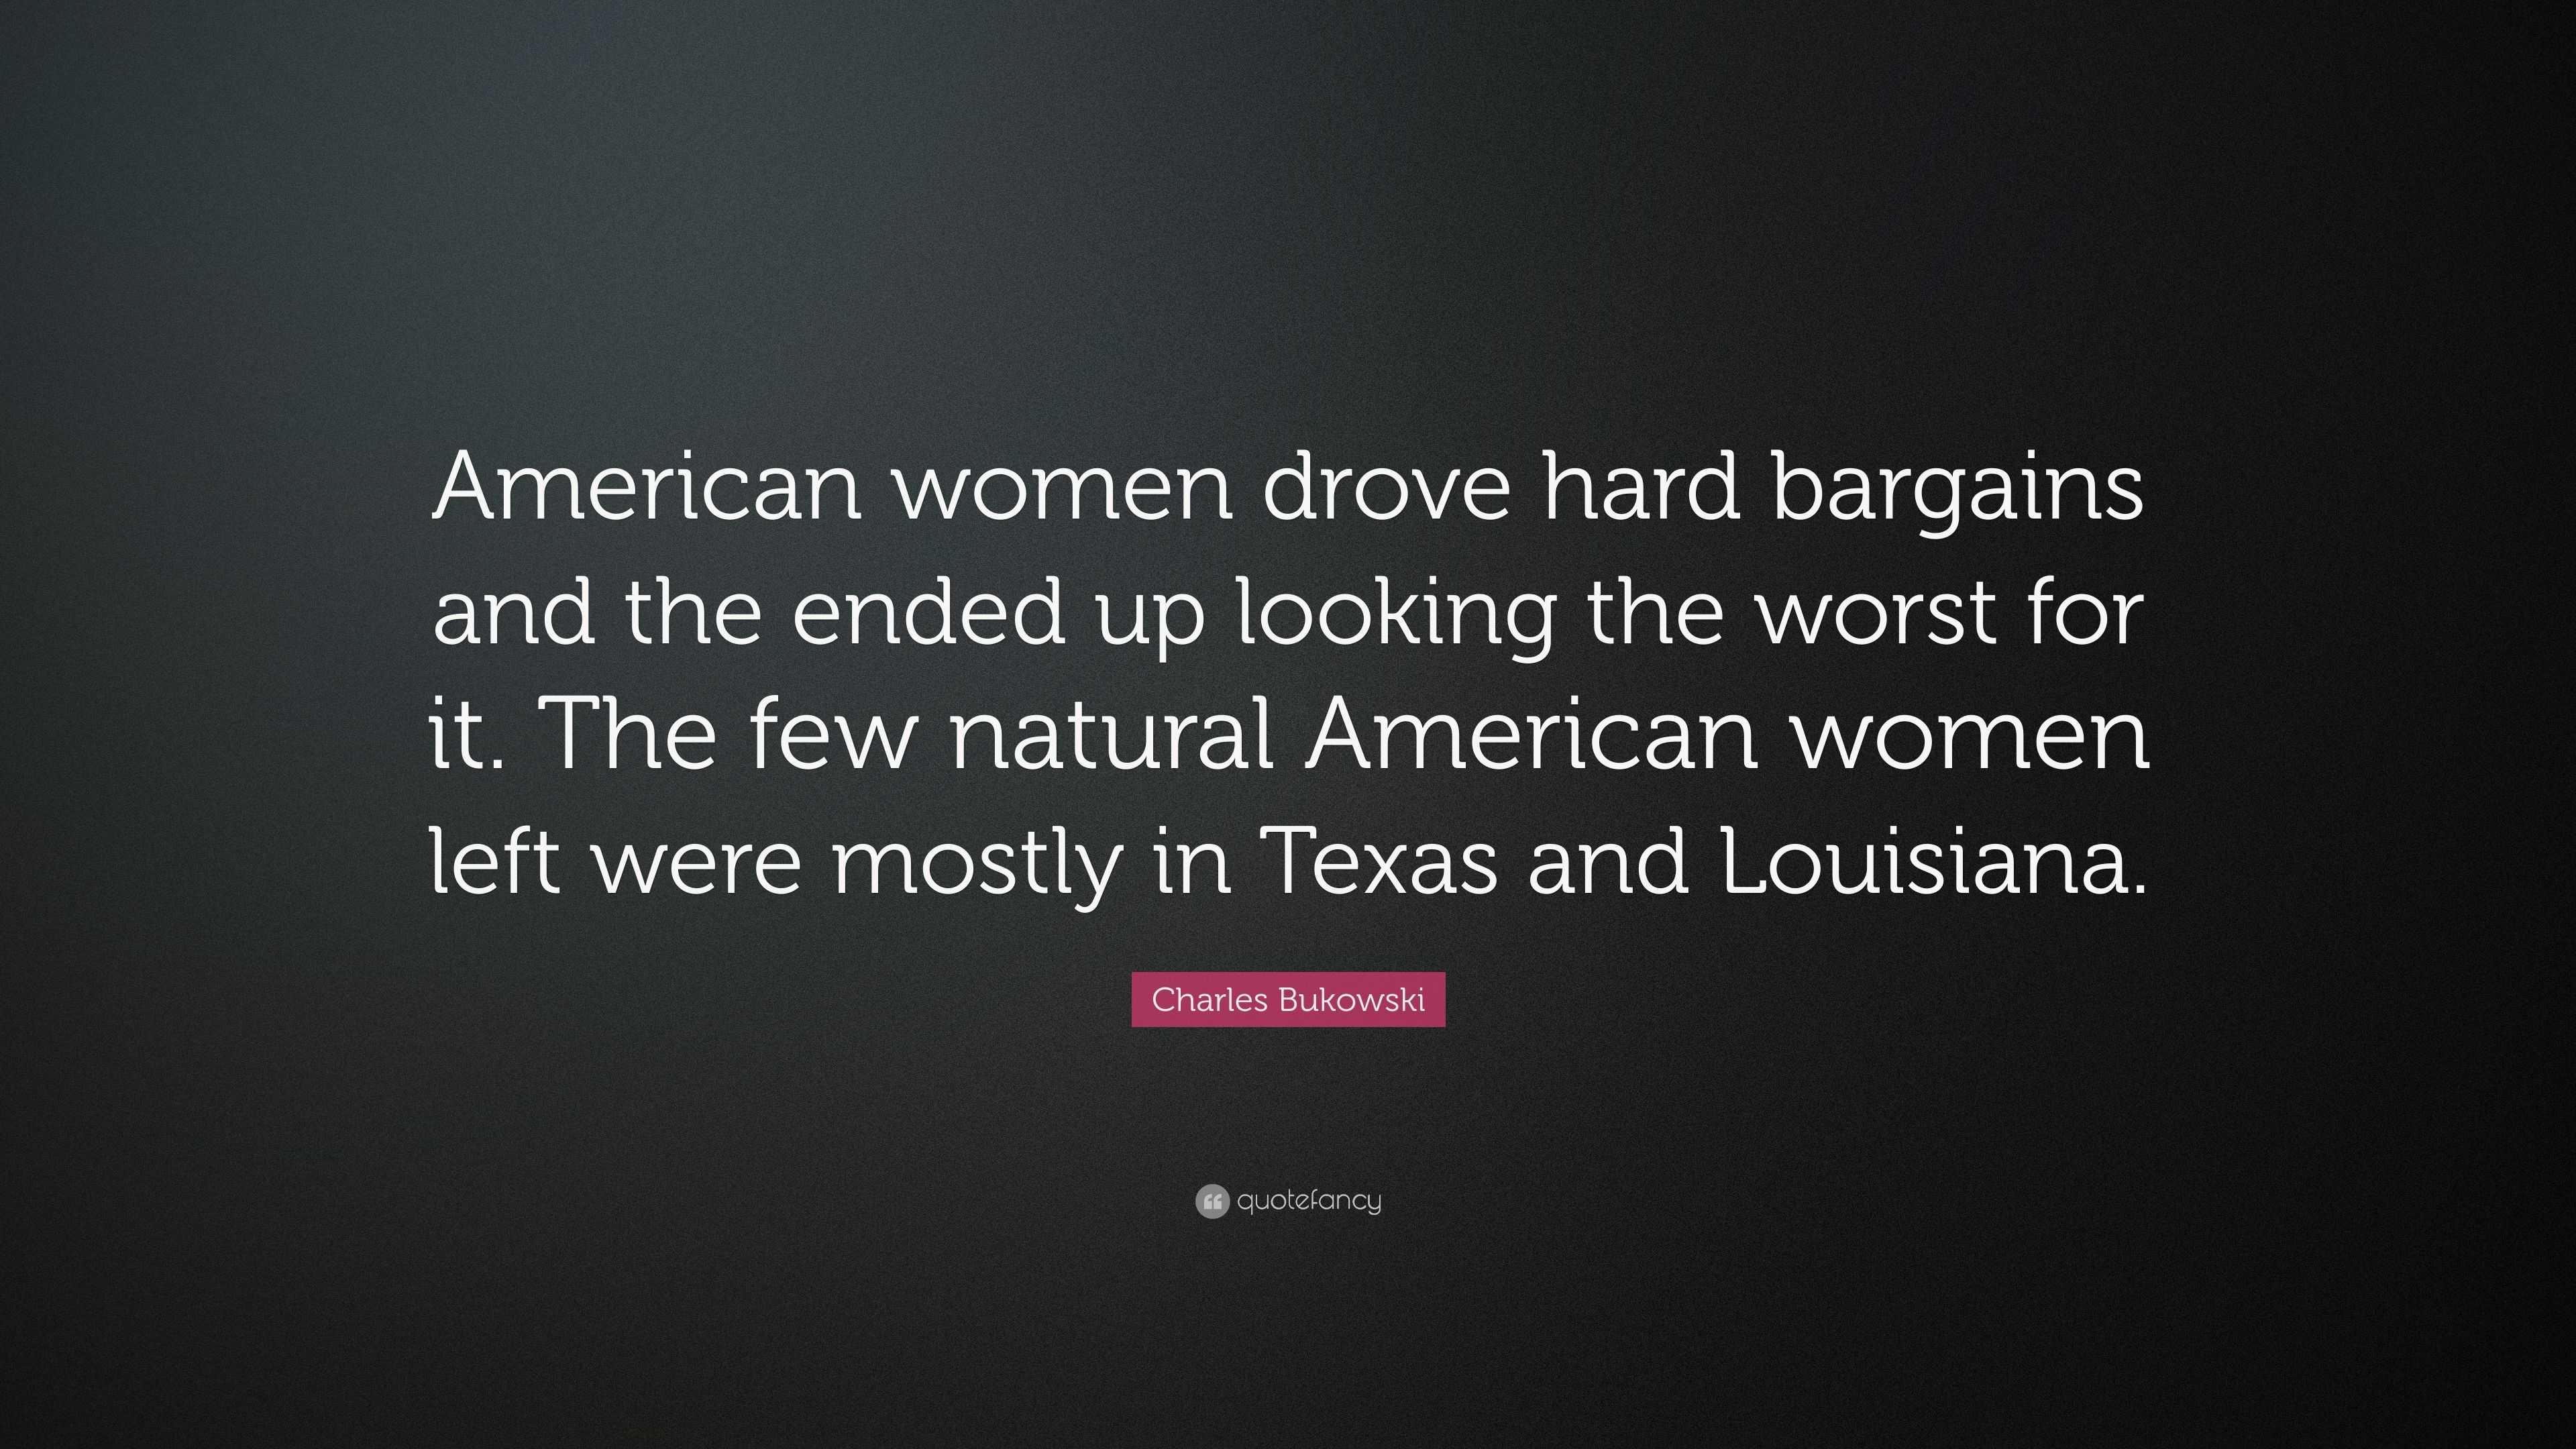 Charles Bukowski Quote: “American women drove hard bargains and the ended  up looking the worst for it. The few natural American women left were m”